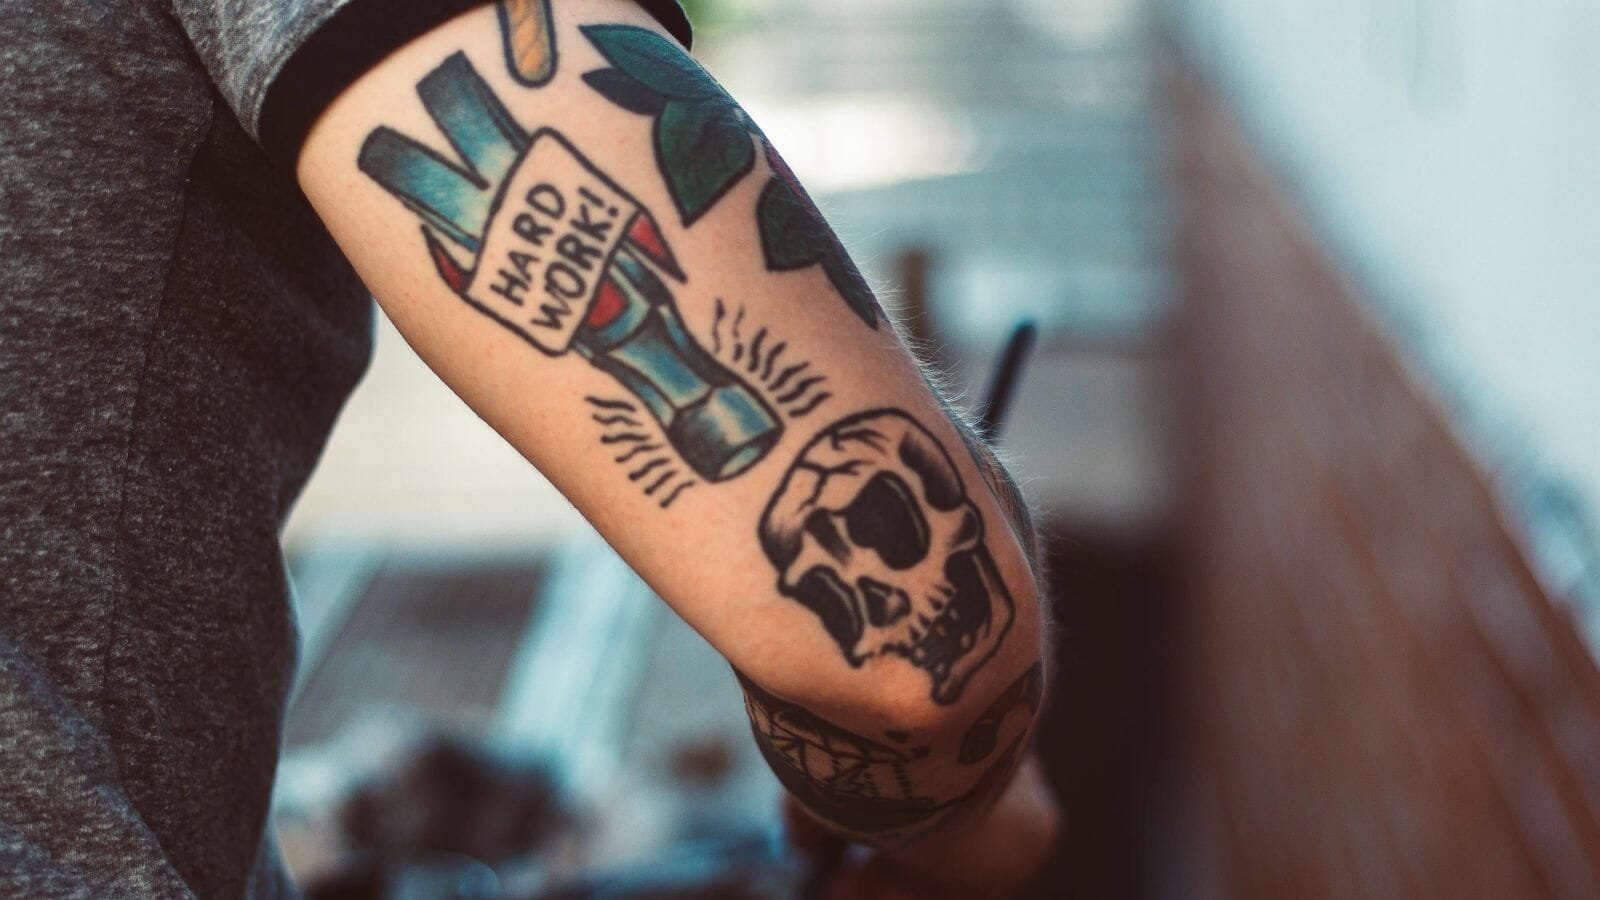 101 Amazing Elbow Tattoos Design Ideas You Need To See Outsons Men S Fashion Tips And Style Guide For